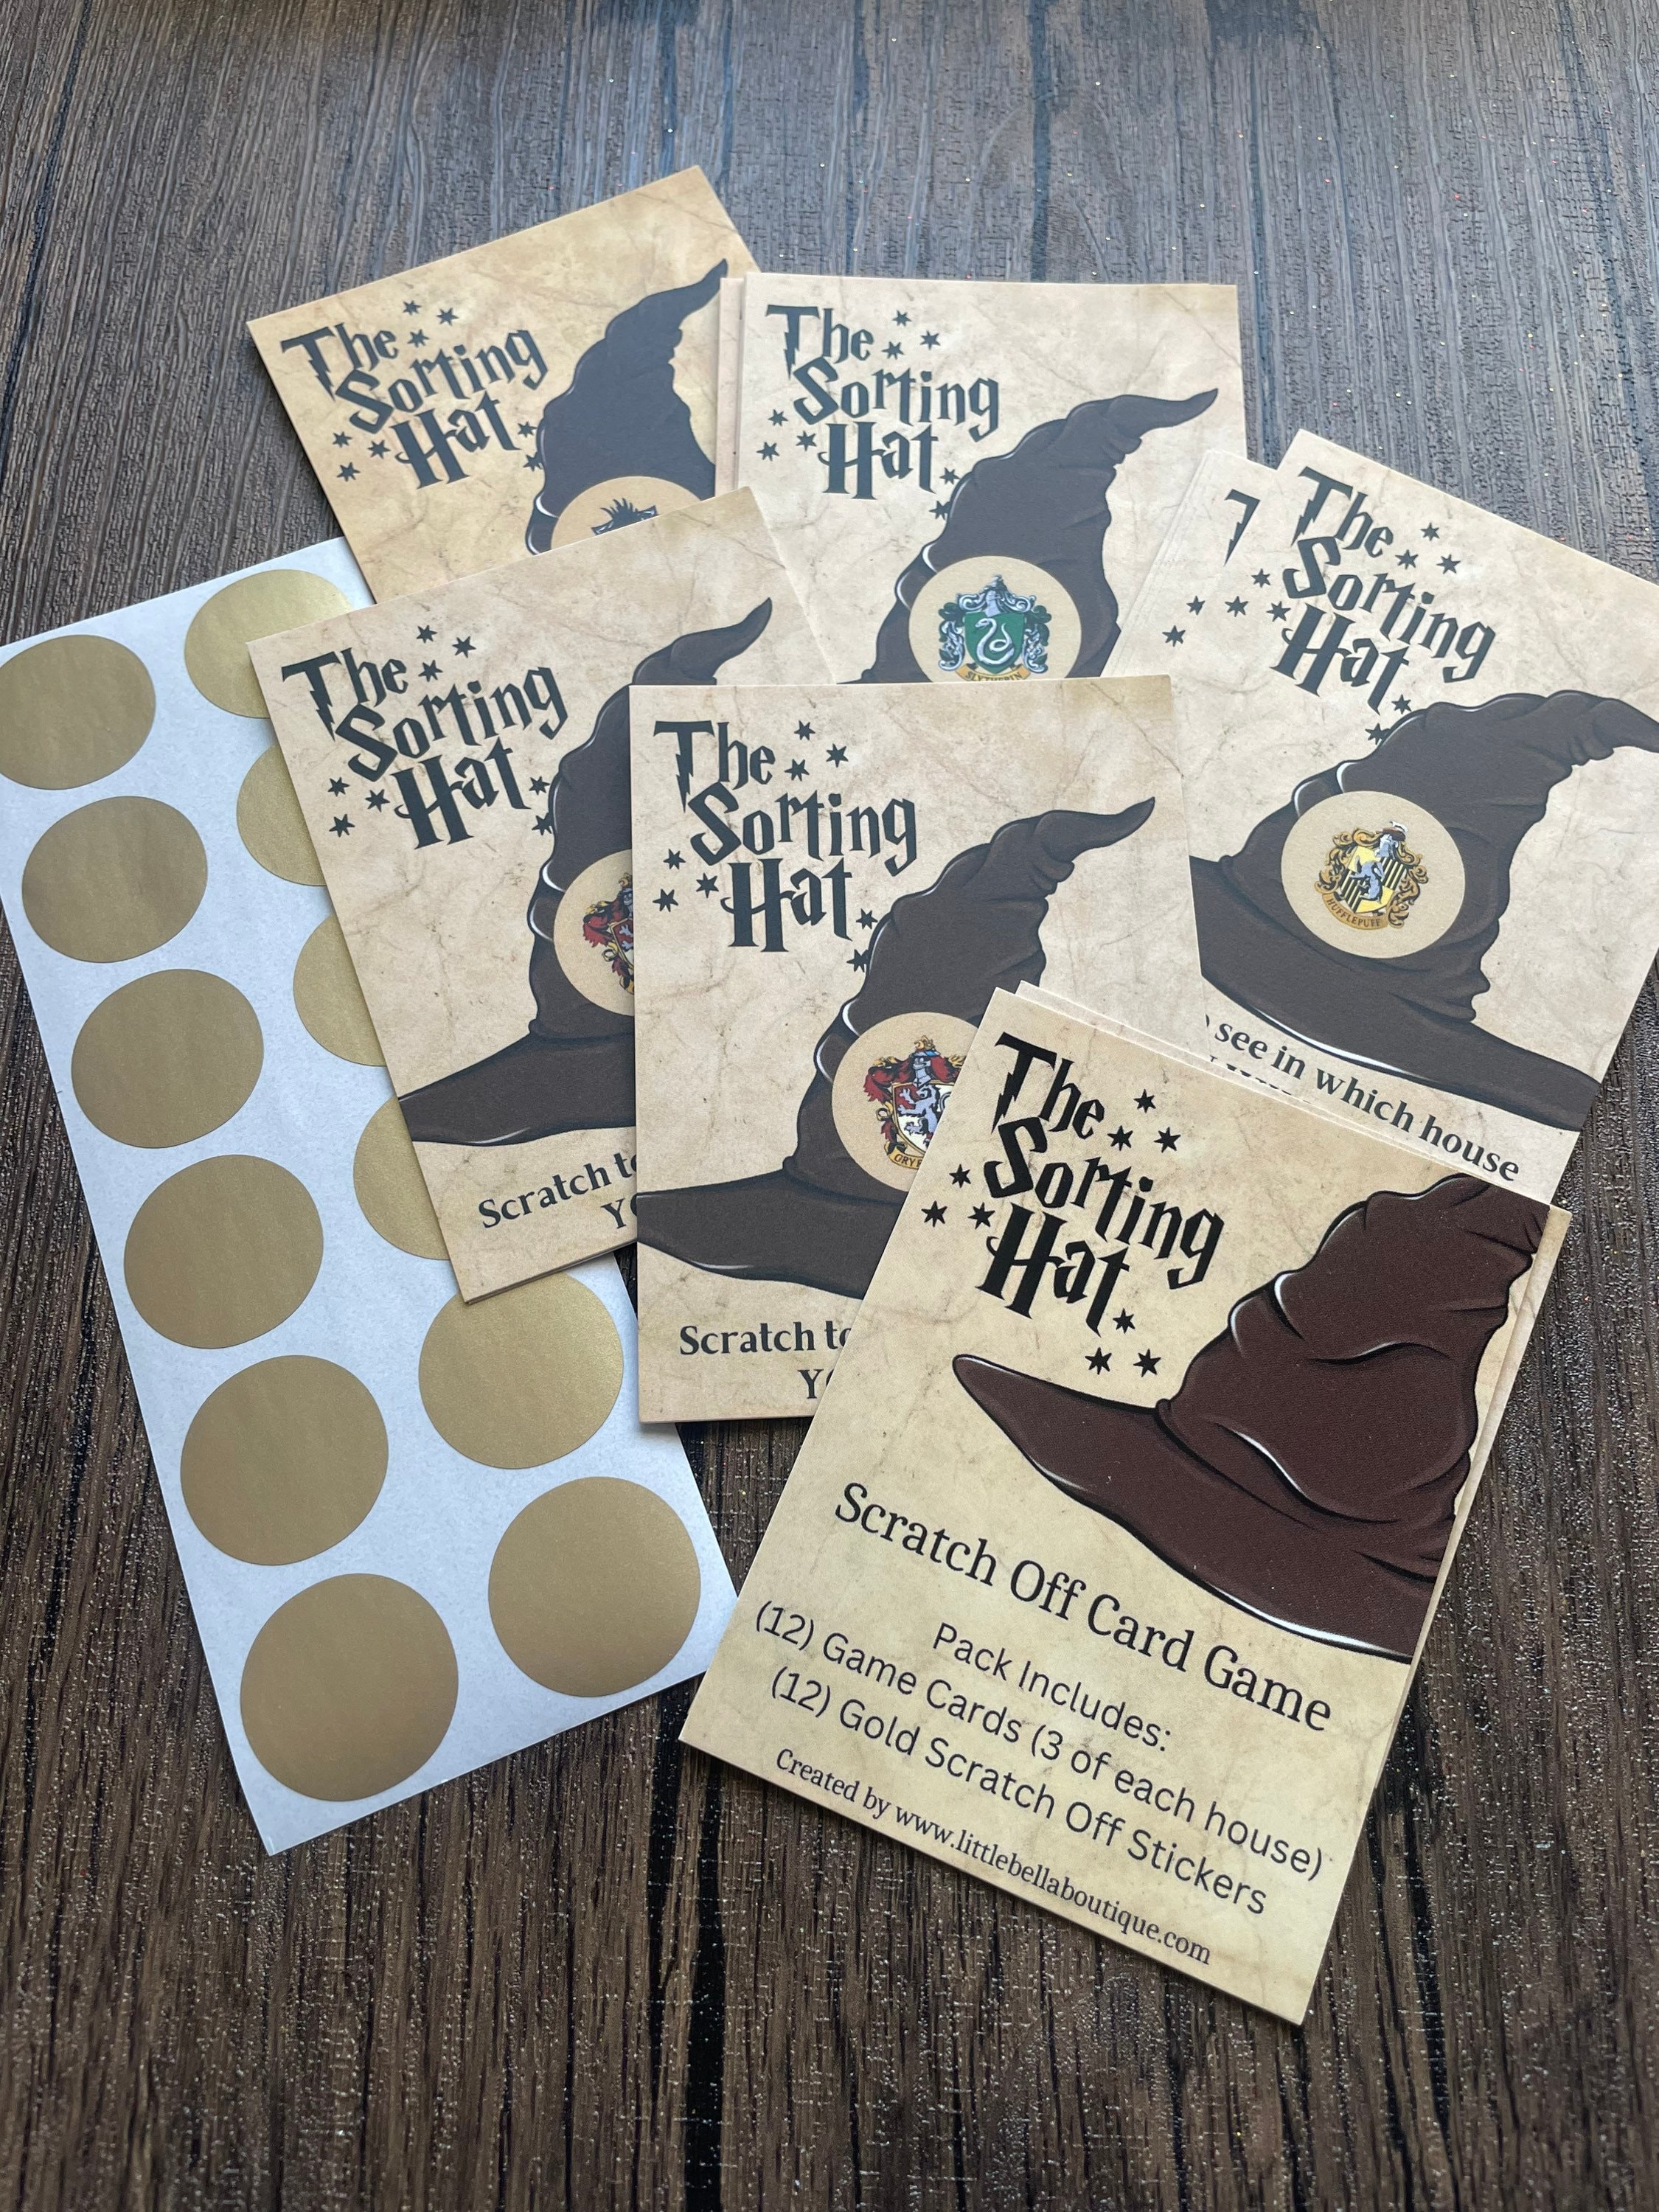 Harry Potter Stickers Party Favors Bundle ~ 10 Sheets Harry Potter Stickers Featuring Harry, Ron, Hermione and More (Harry Potter Party Supplies)